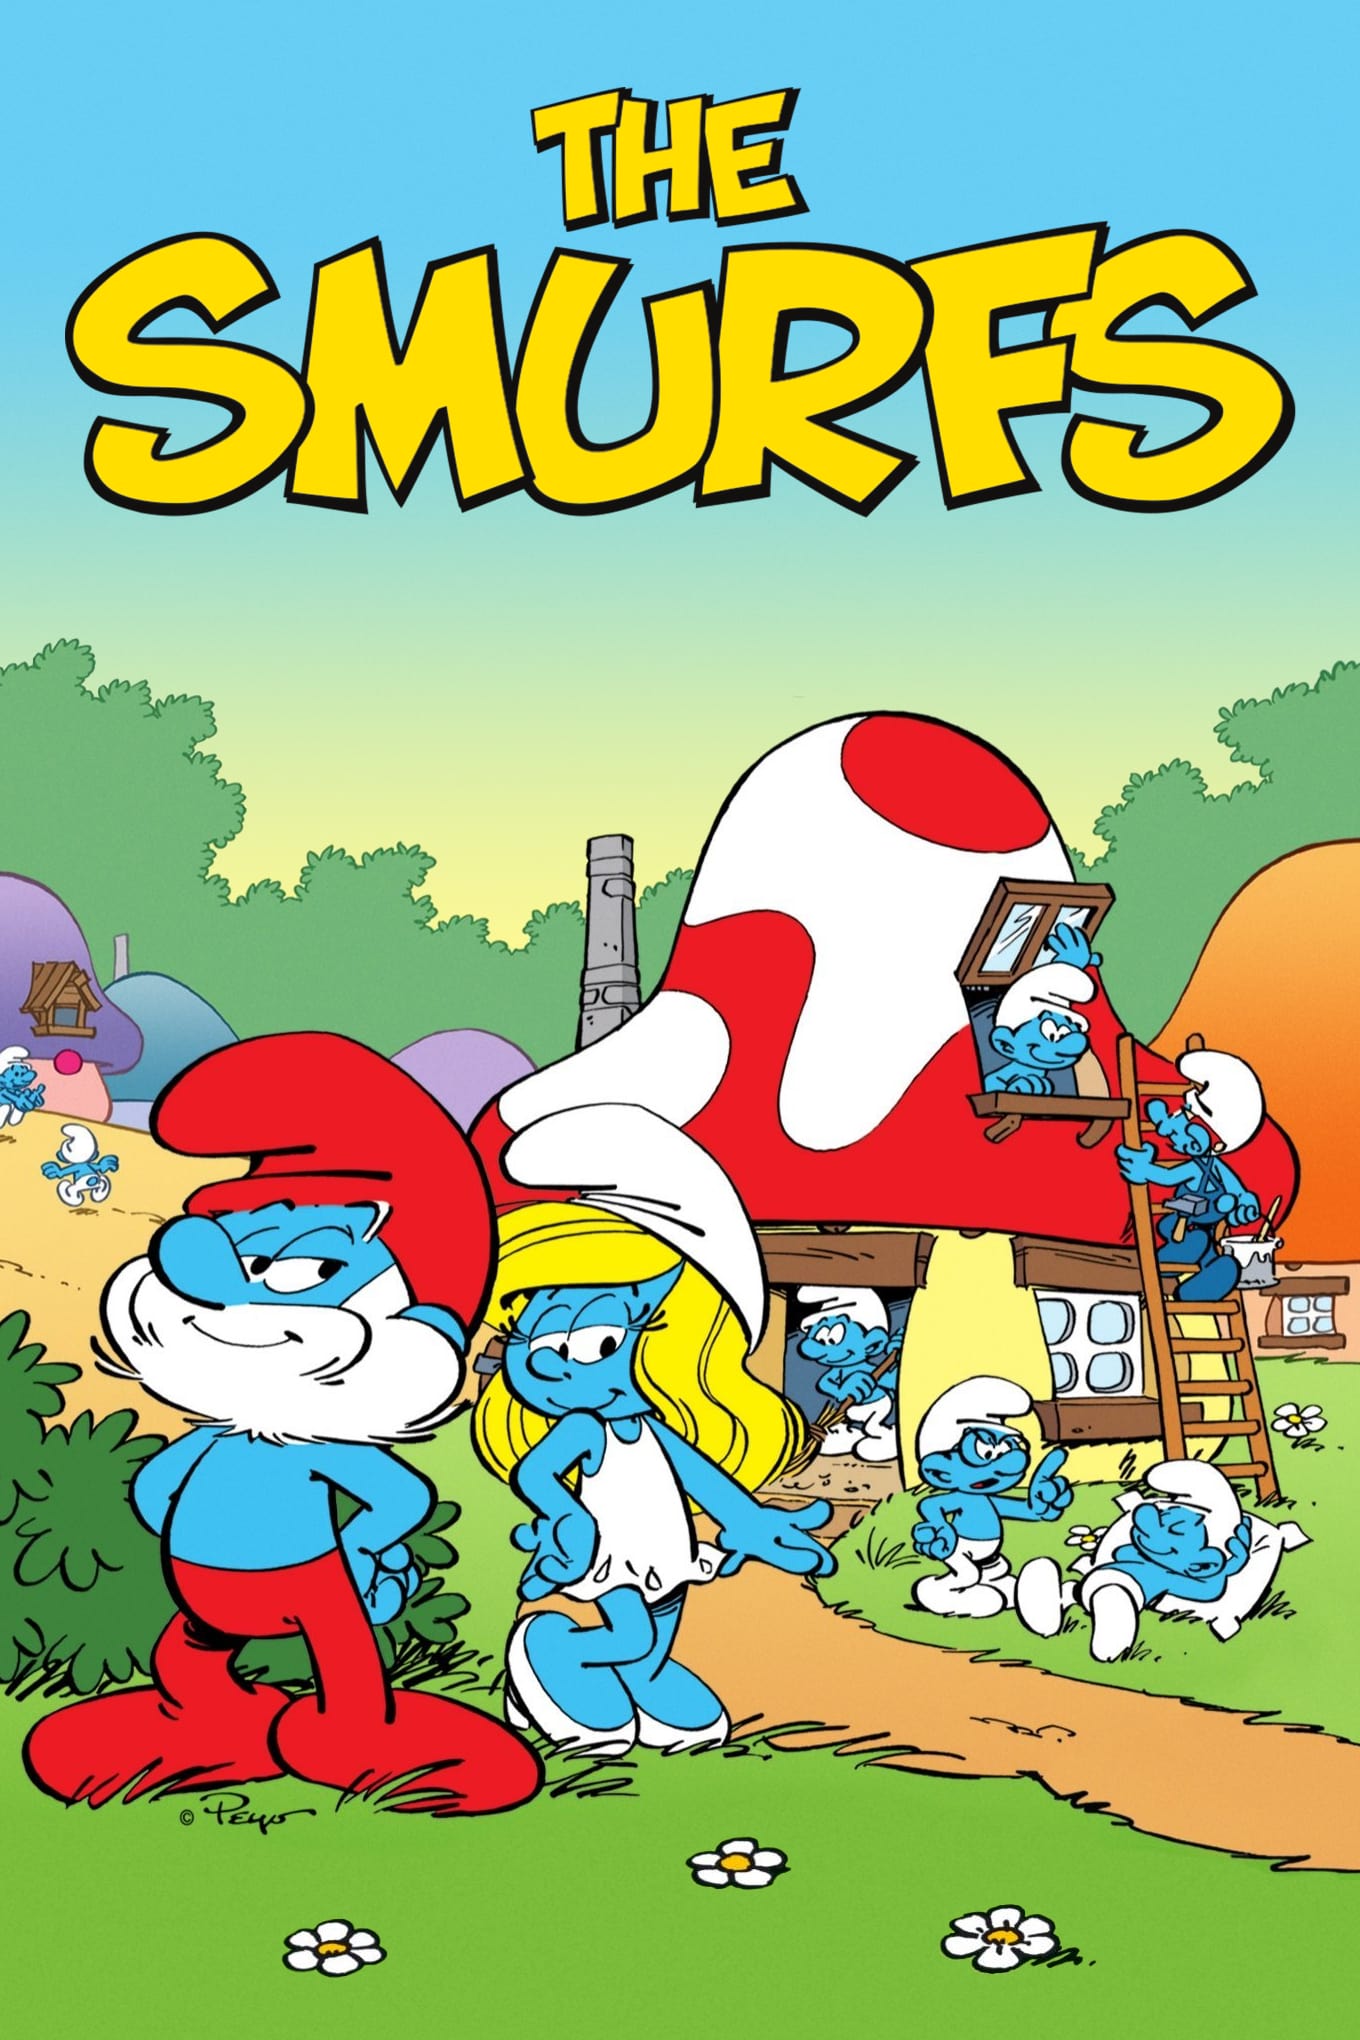 The Smurfs Images. 